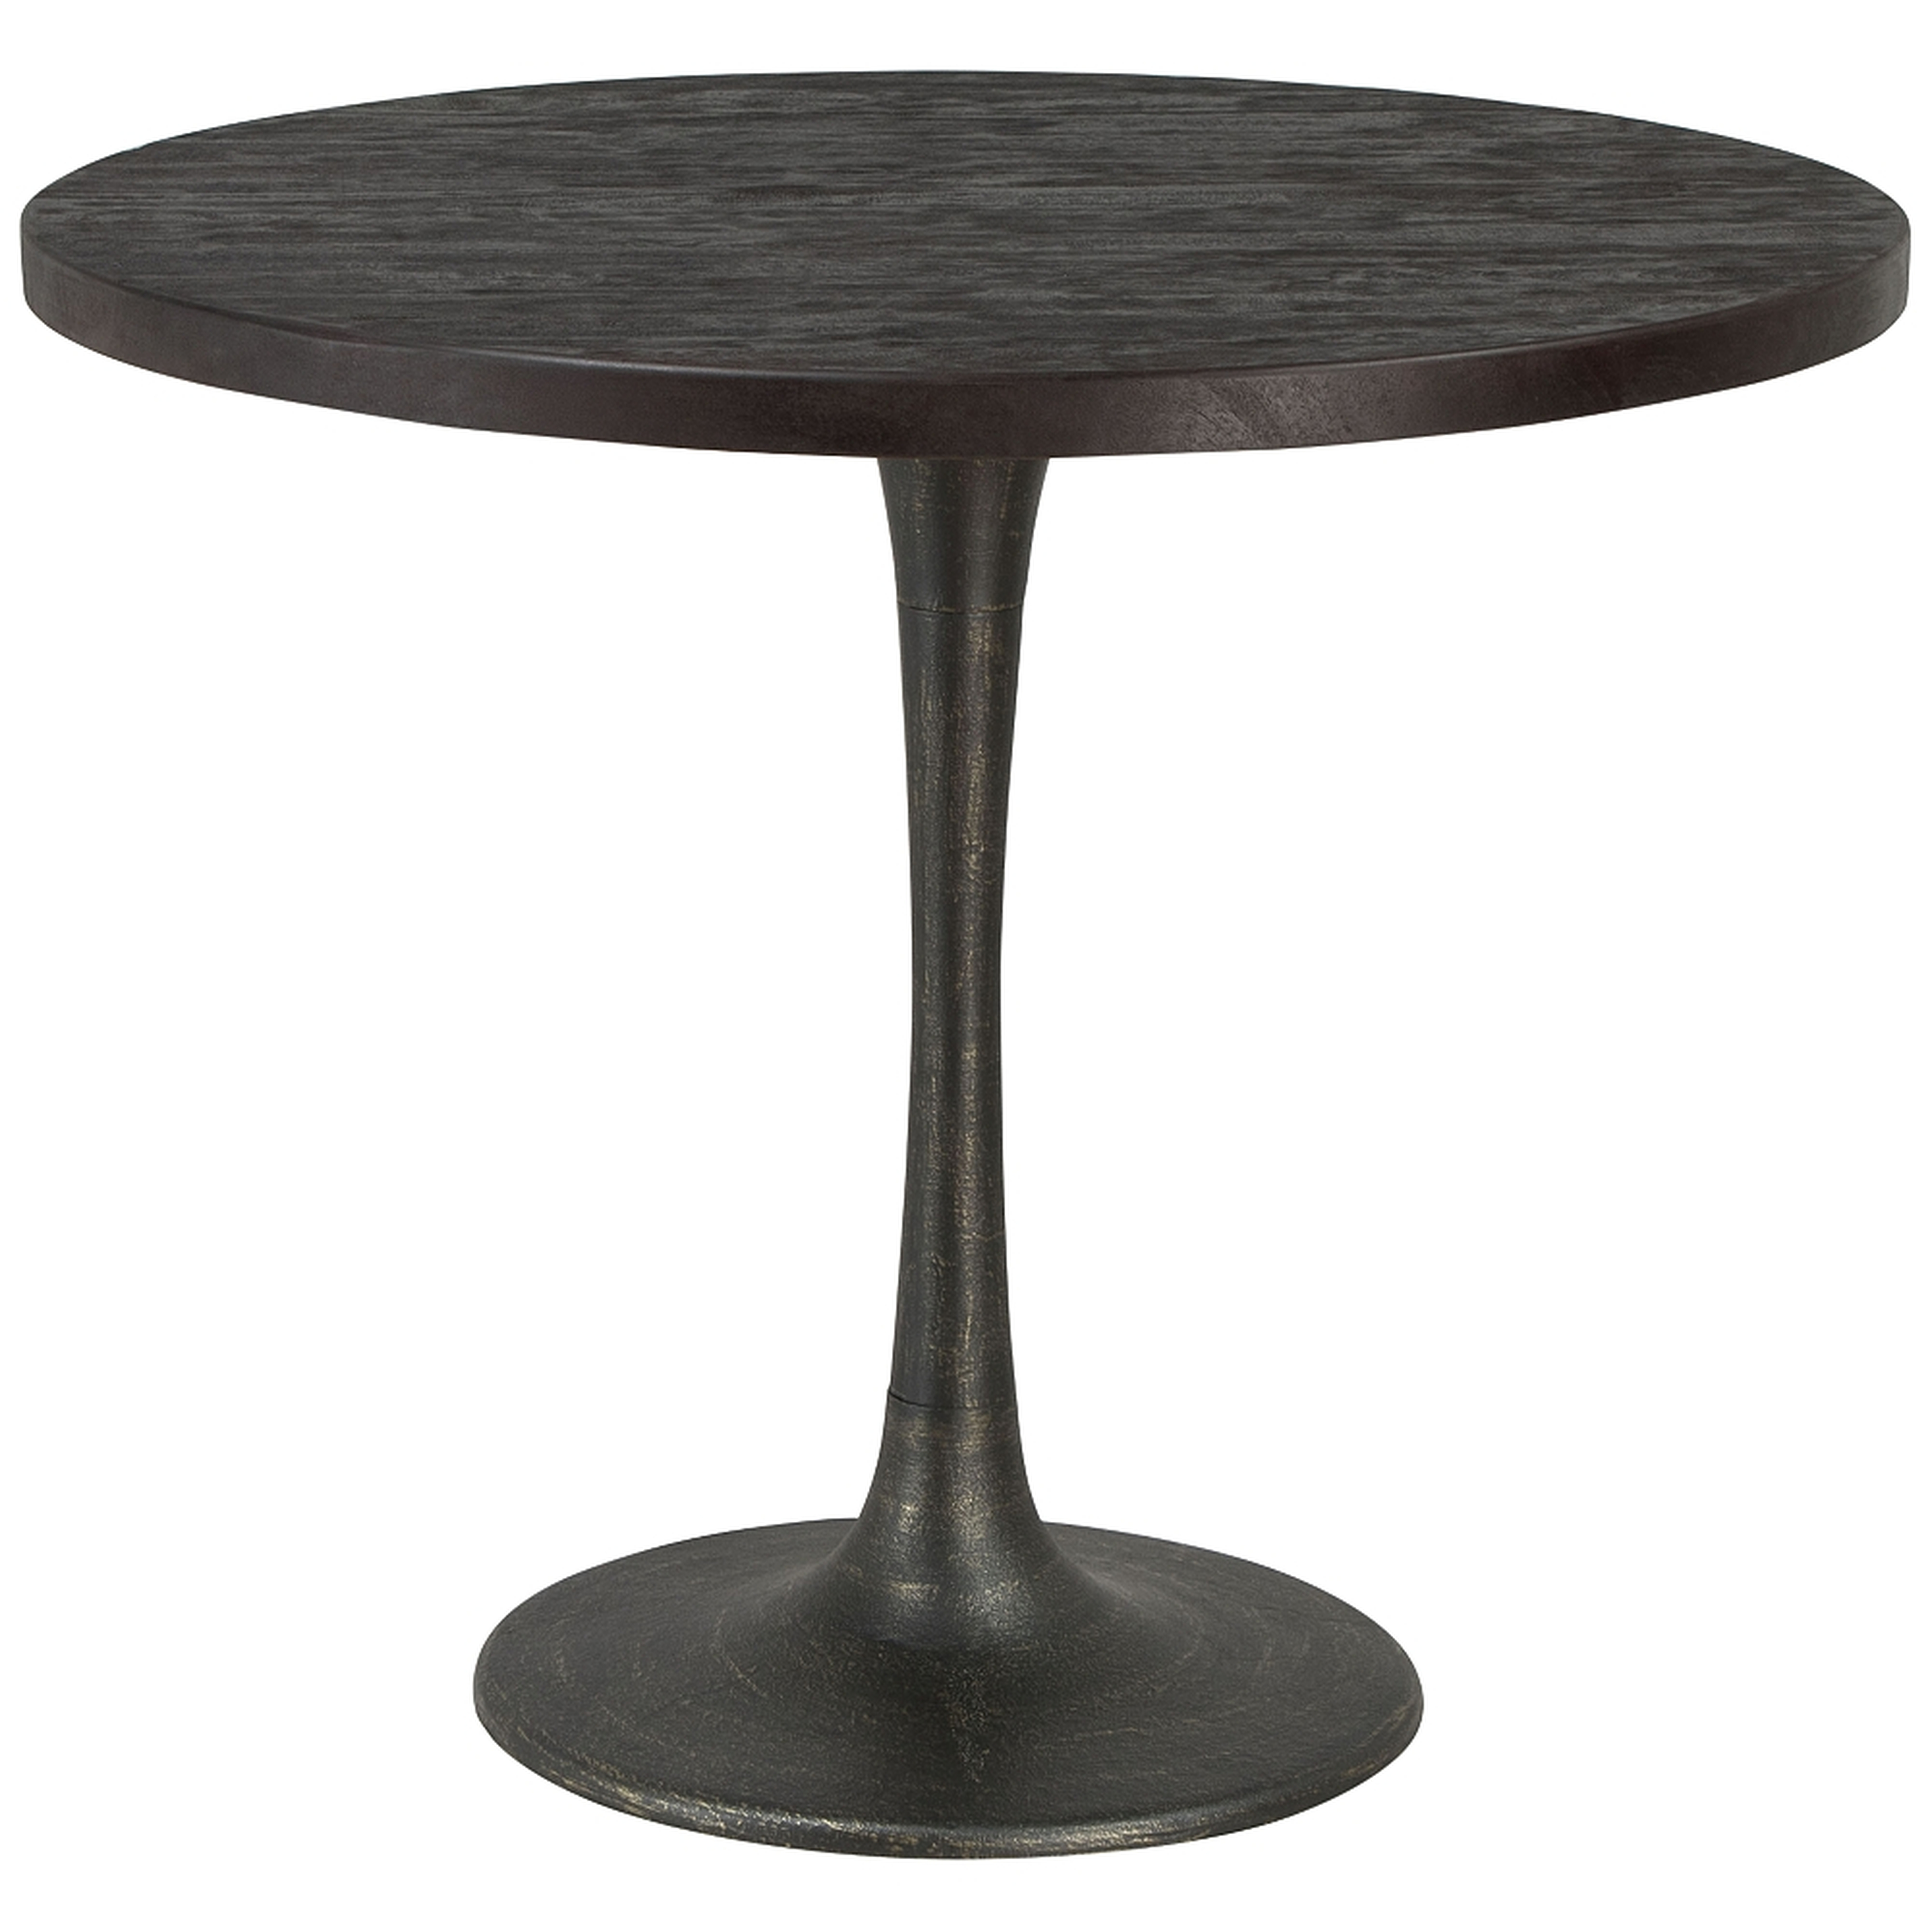 Zuo Montreal 36" Wide Black Round Dining Table - Style # 95Y13 - Lamps Plus